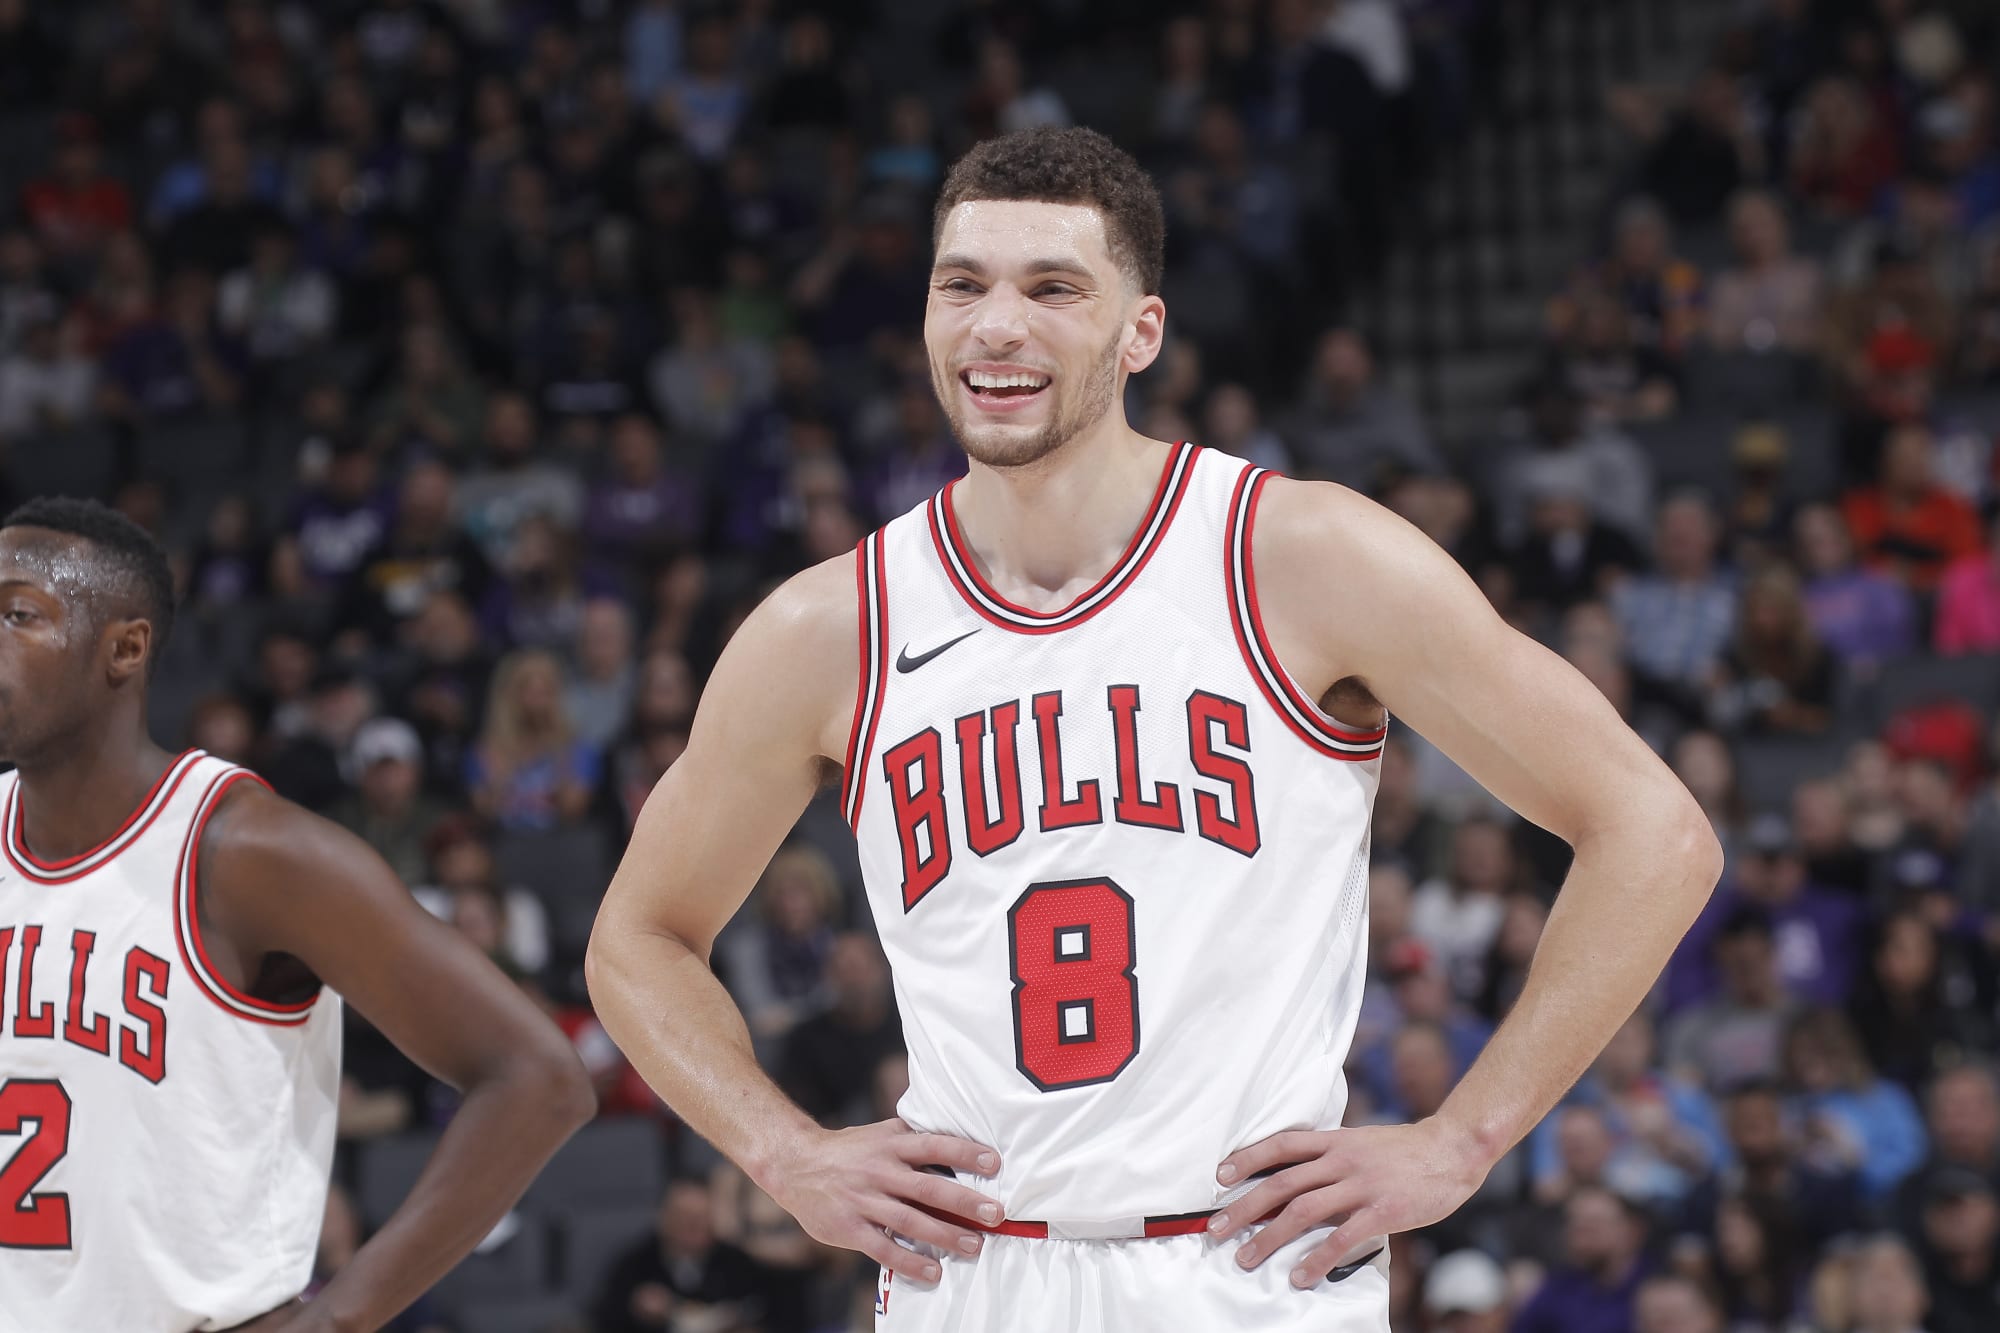 The next 25 games are going to be really important for Zach LaVine